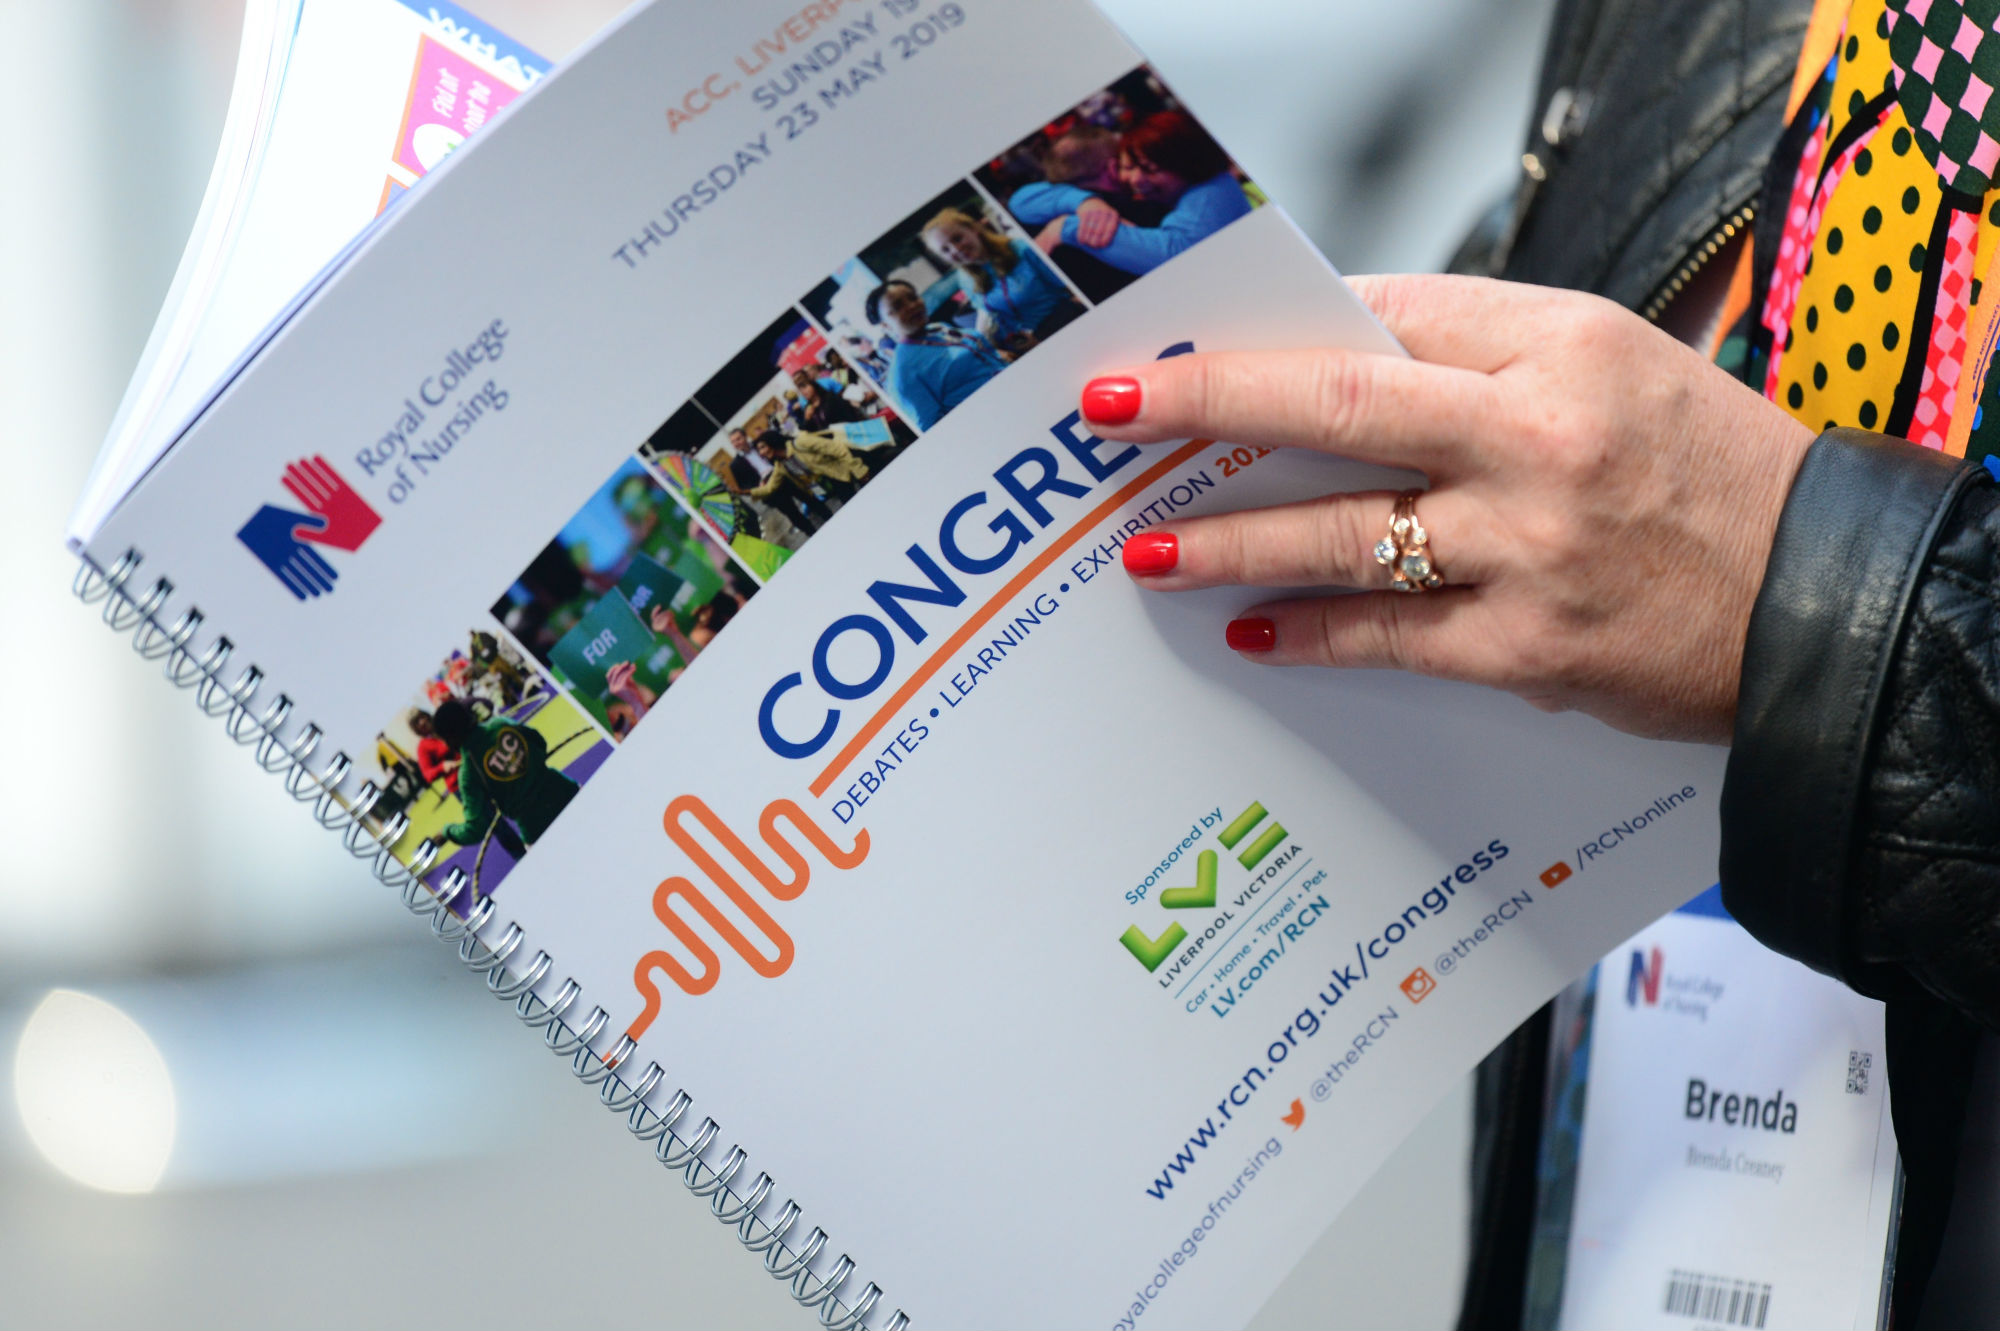 Don't forget to pick up your RCN Congress guide